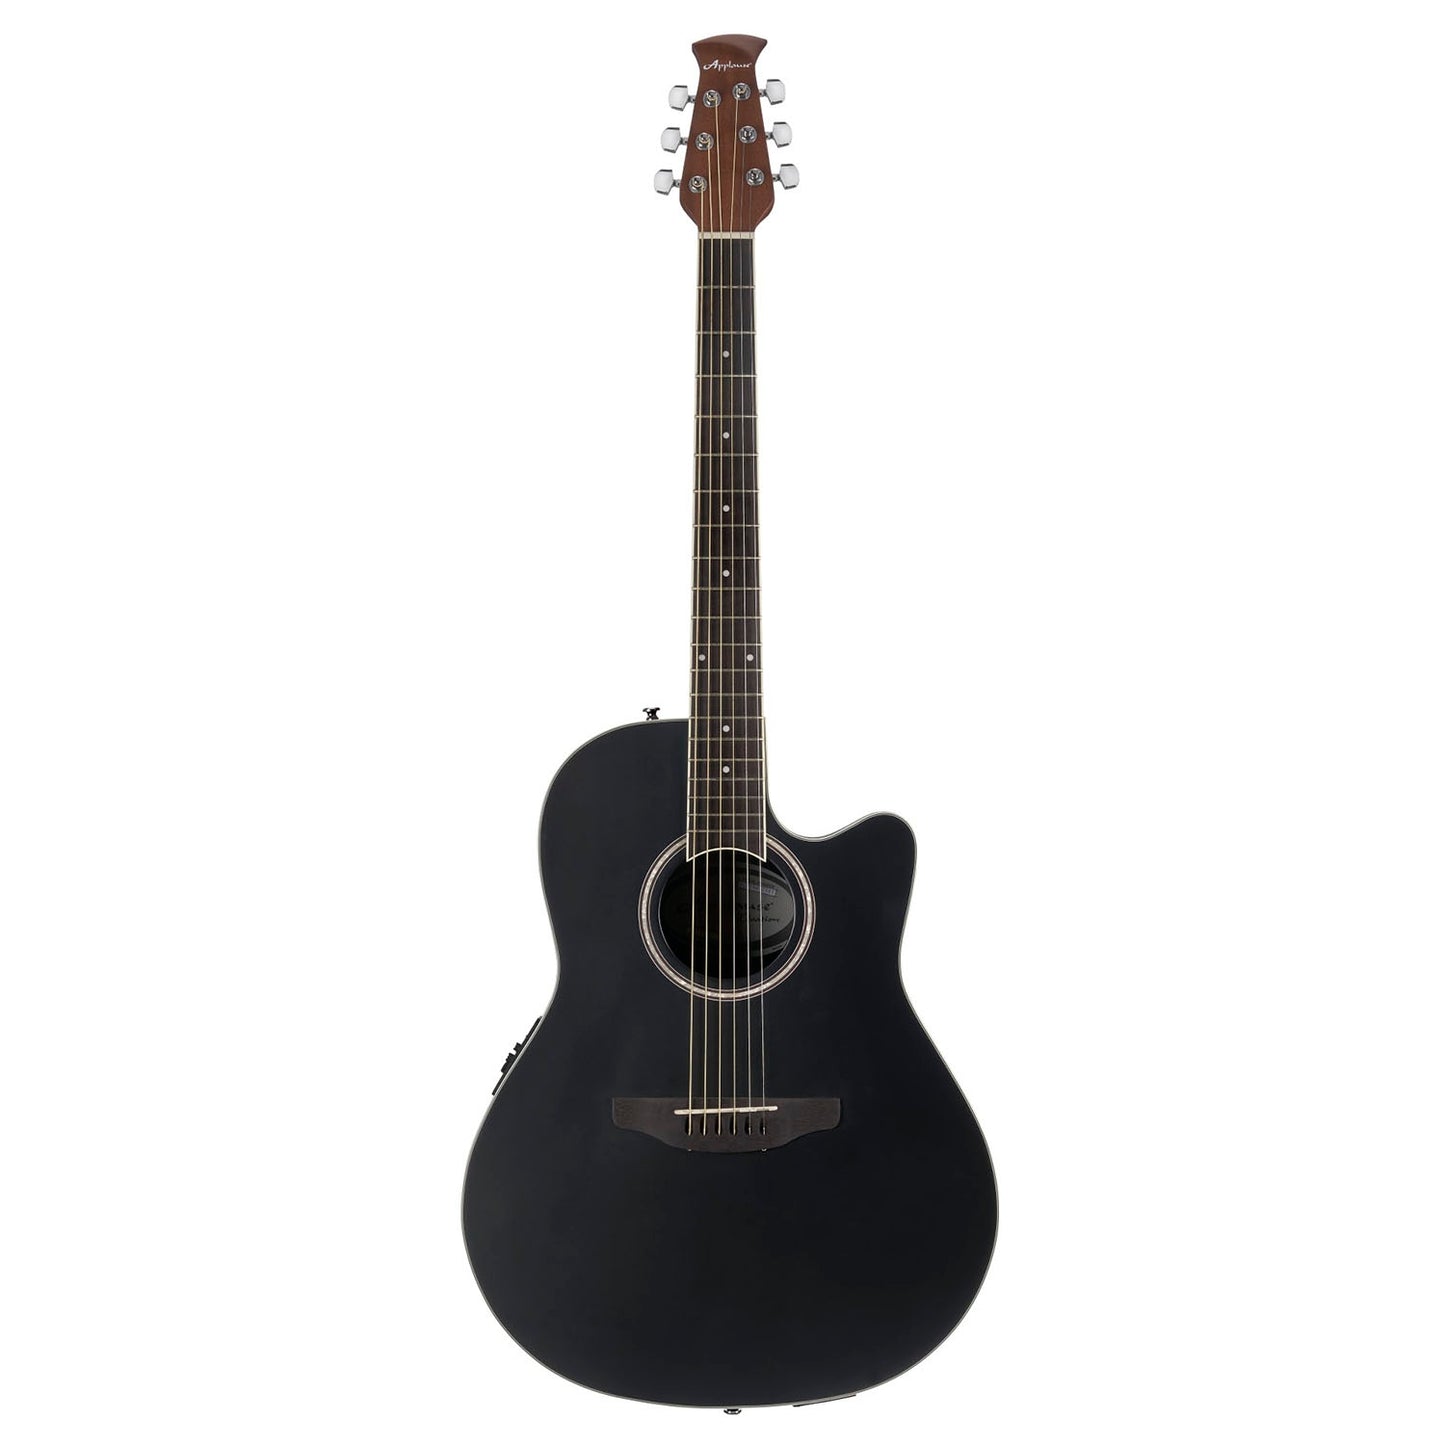 Ovation AB24-5S Mid Depth Acoustic Guitar in Black Satin